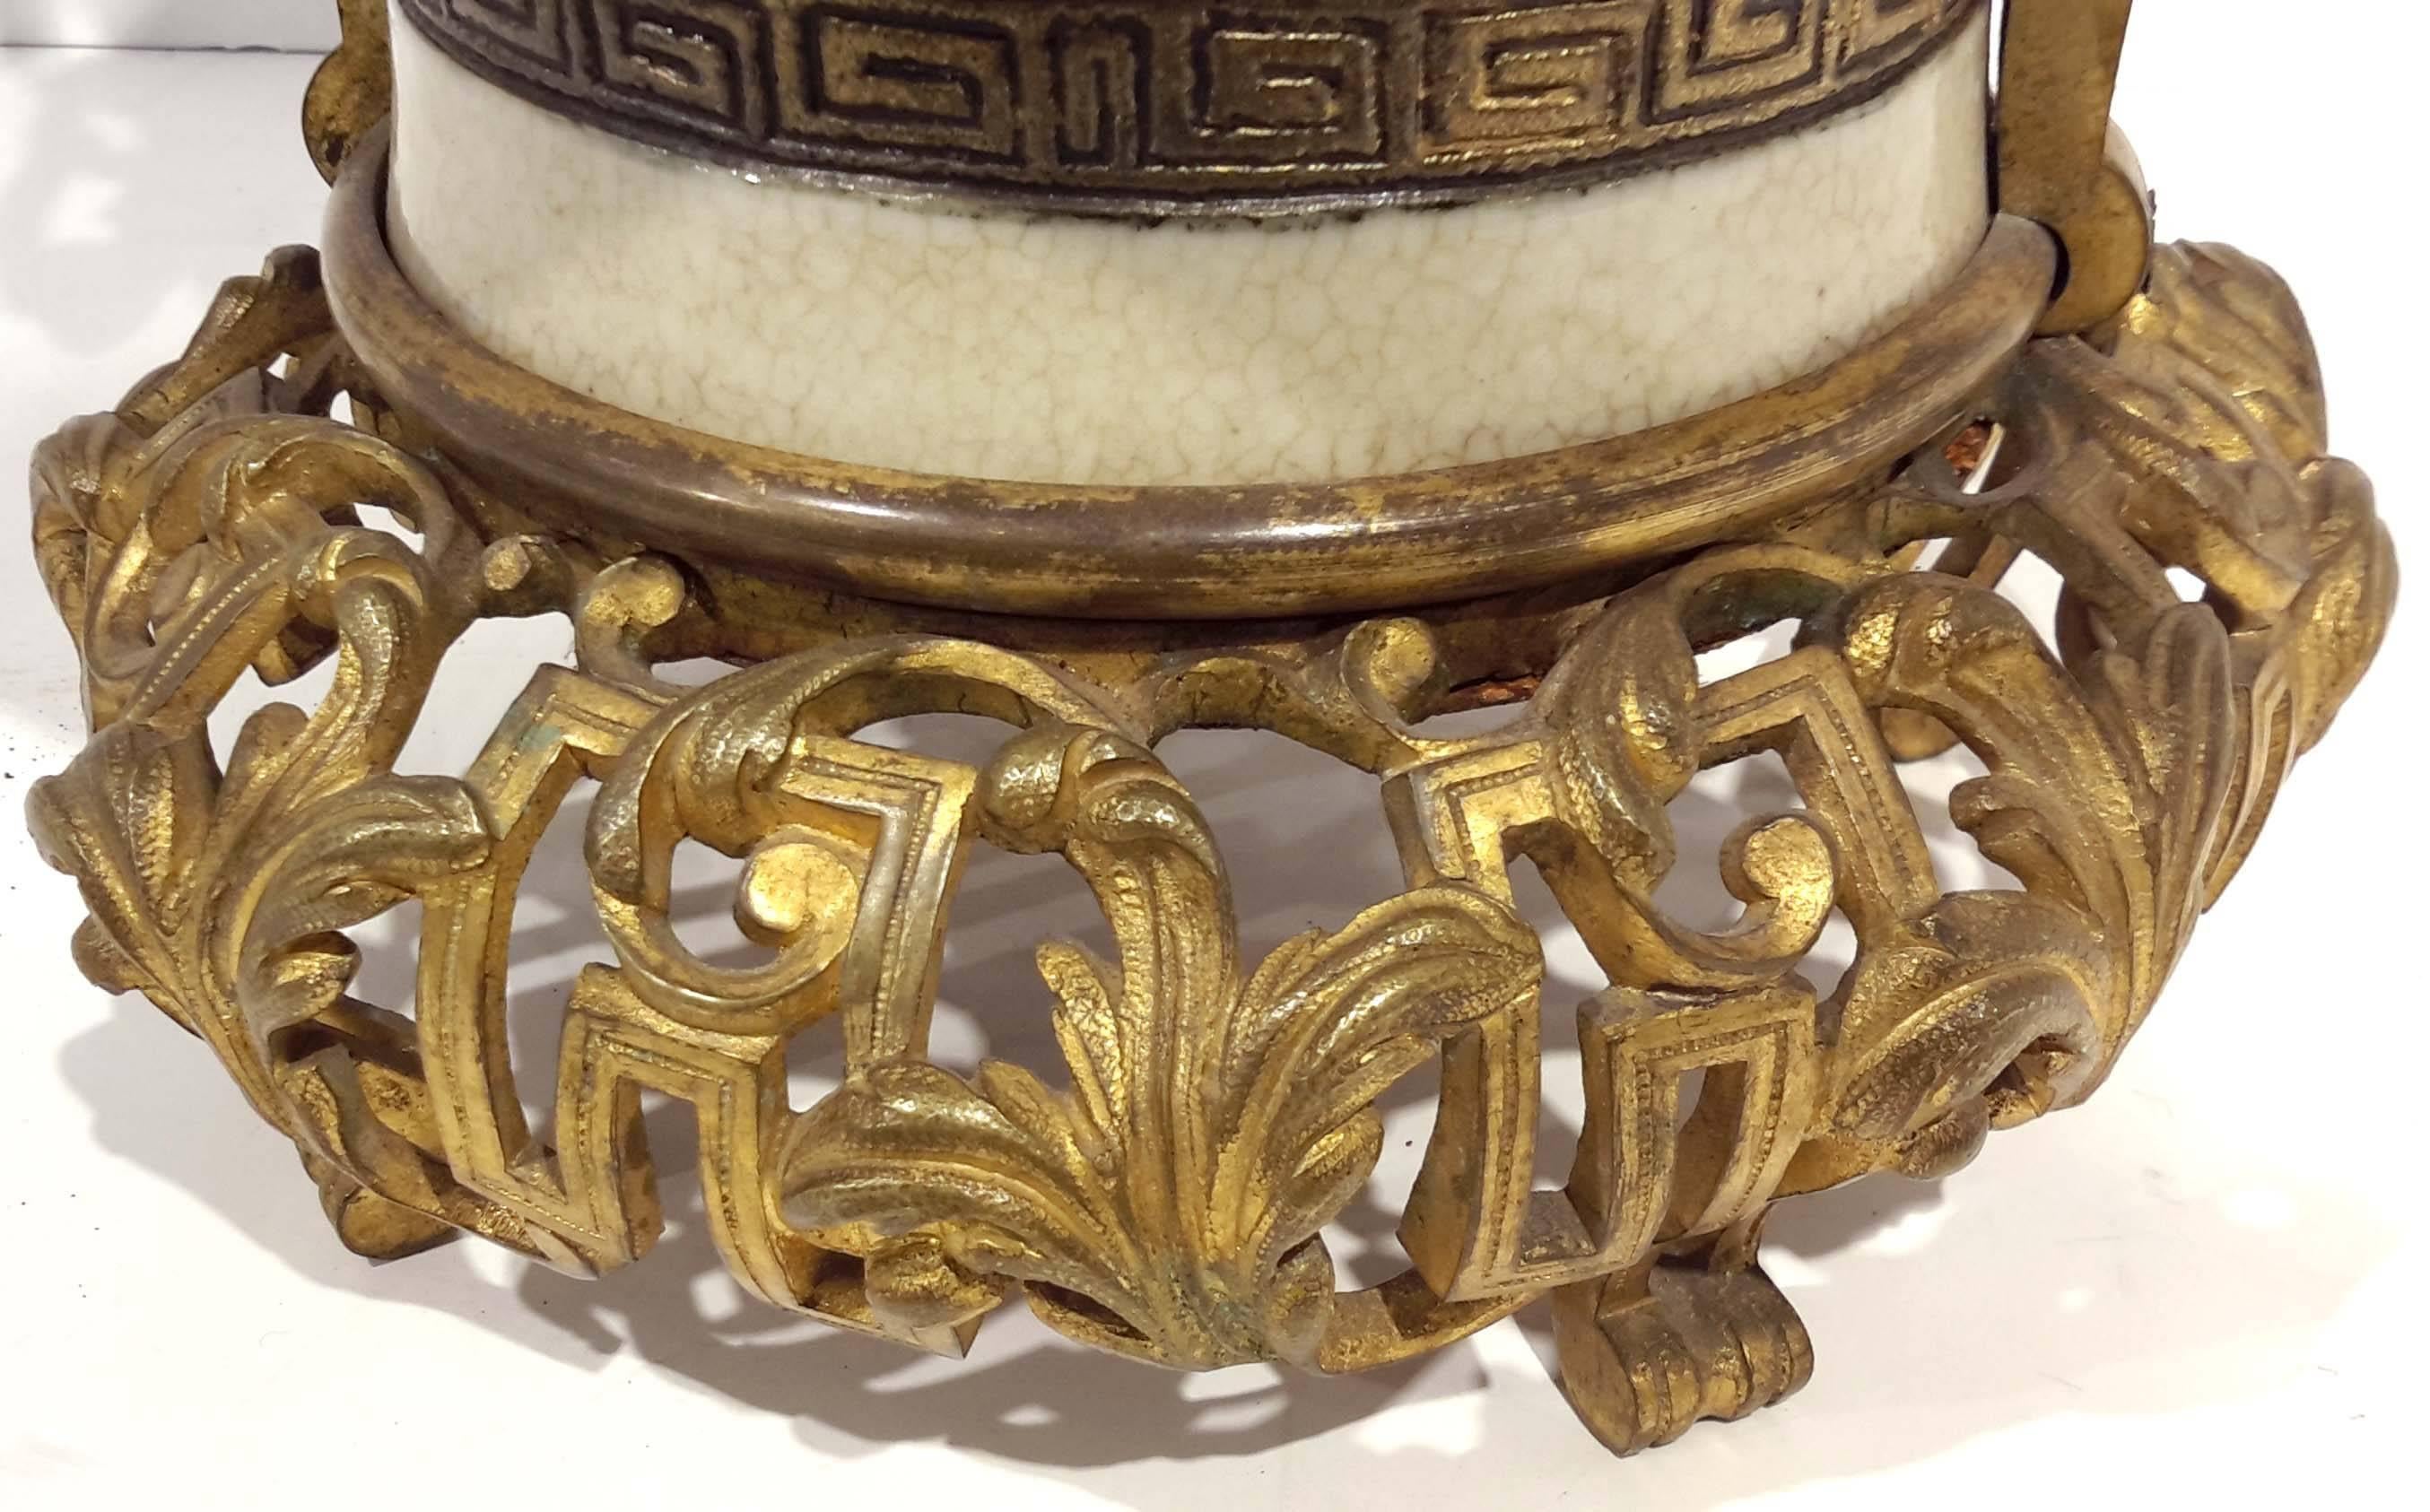 Chinoiserie Gilt Bronze-Mounted Porcelain Planter, French 19th Century For Sale 2